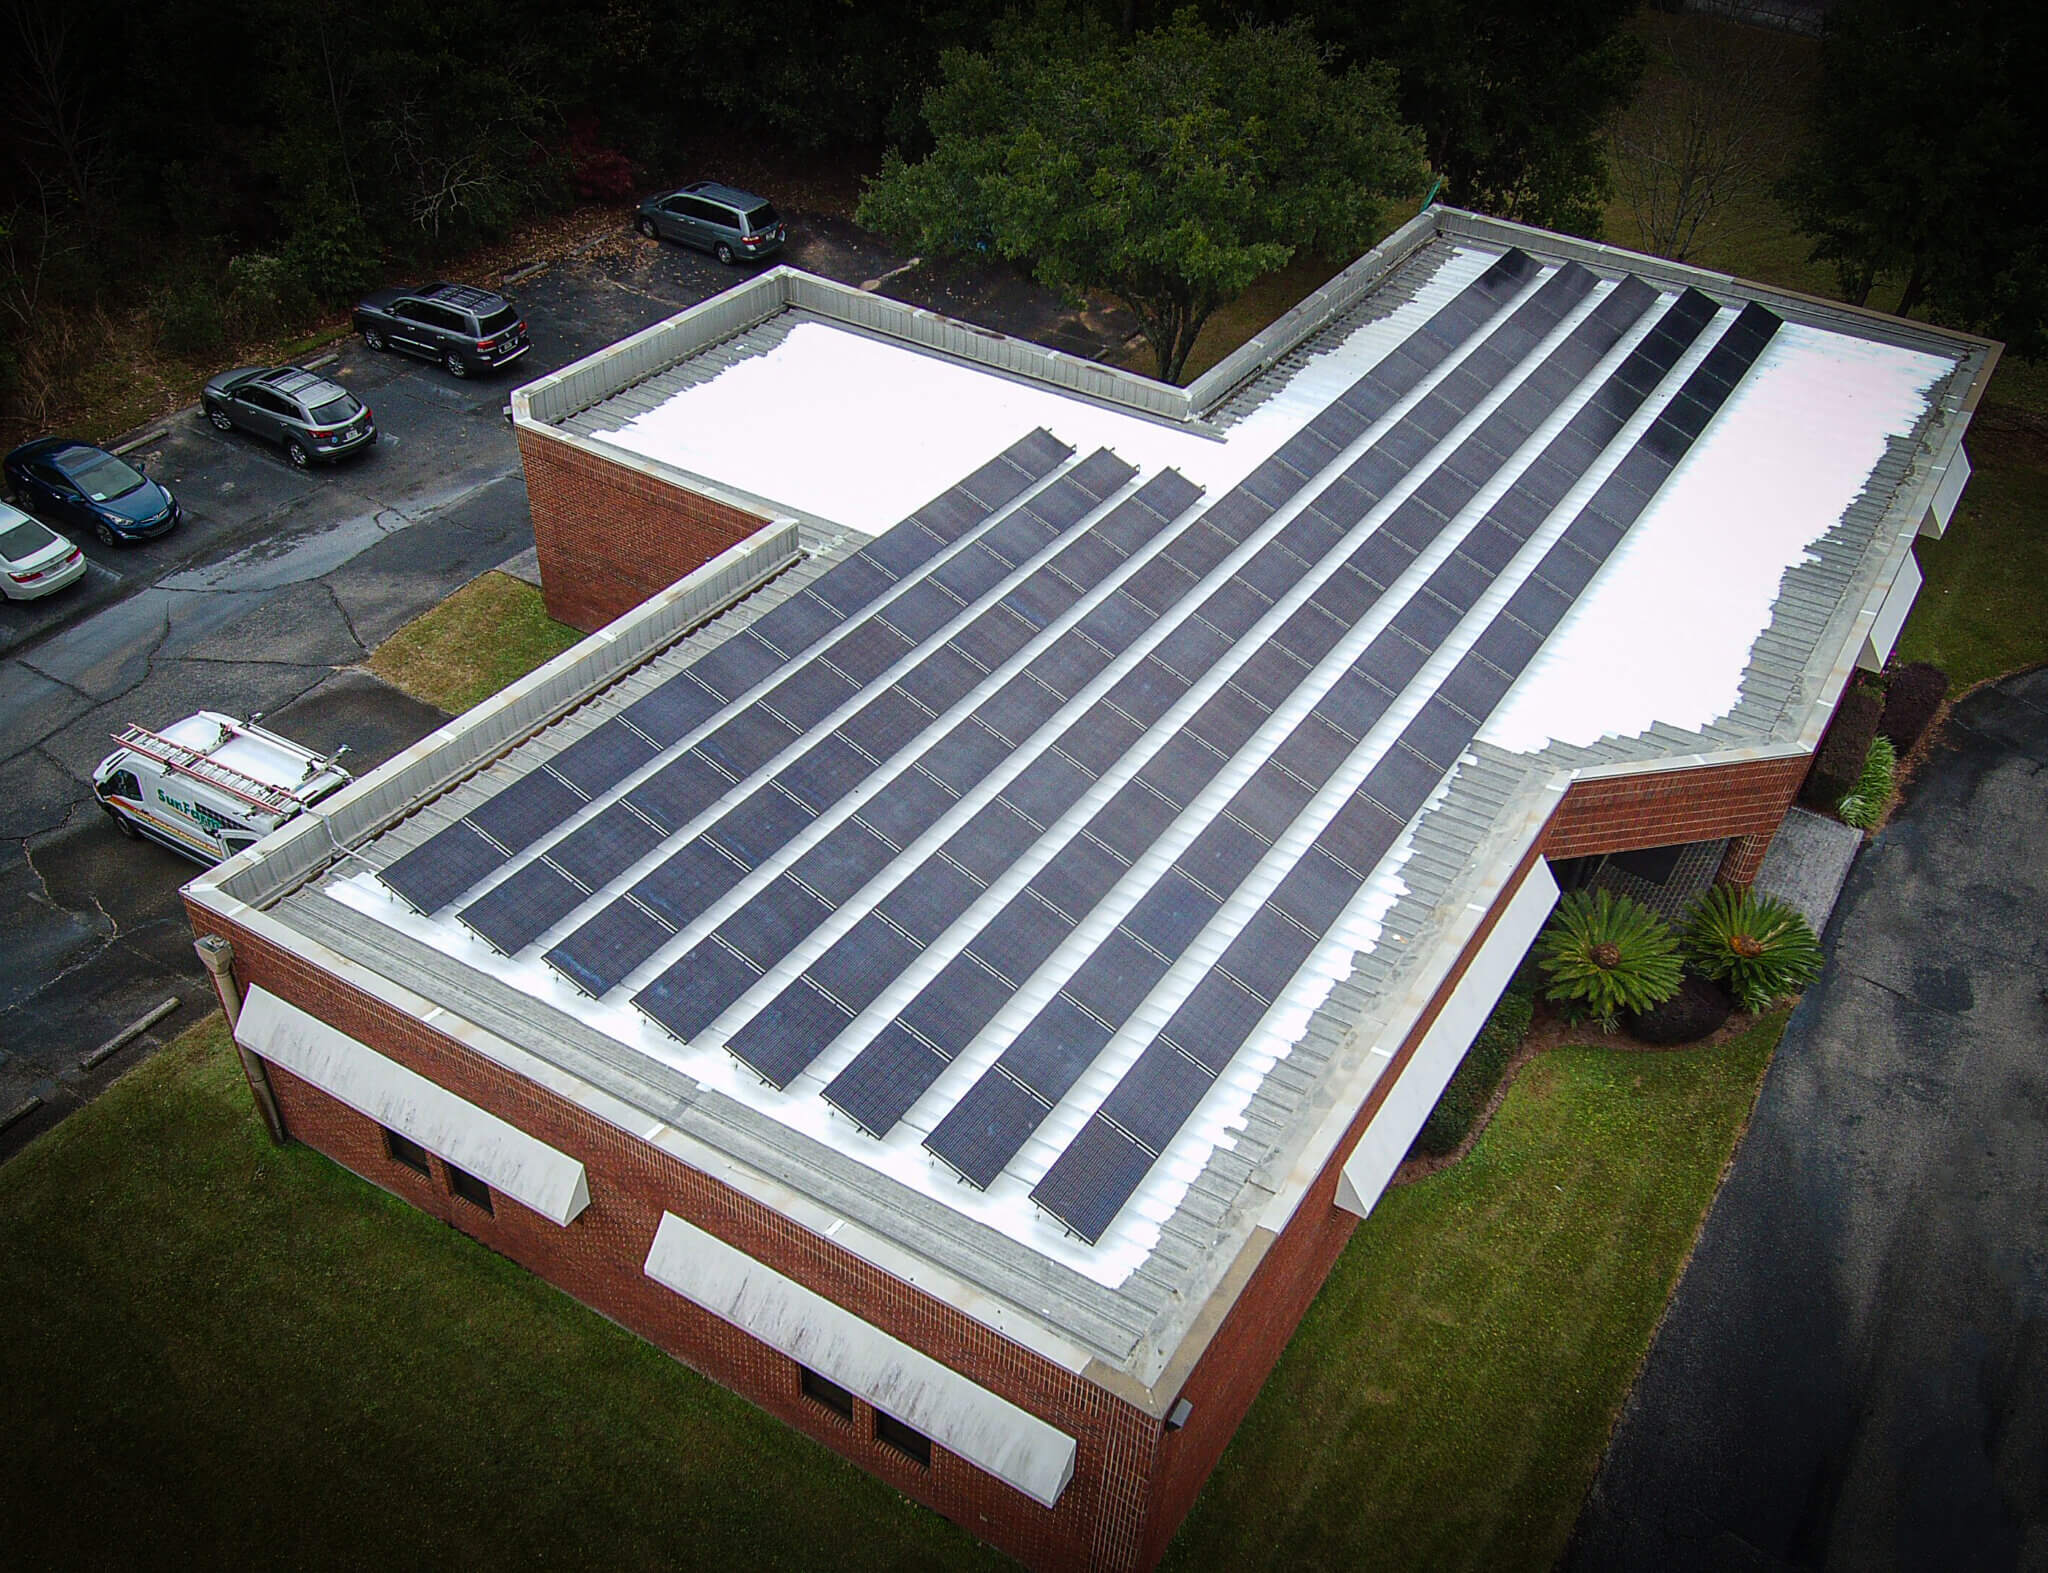 SunFarm Energy’s turnkey, customized commercial solar power systems allow our clients to enjoy the benefits of solar without any of the hassle.